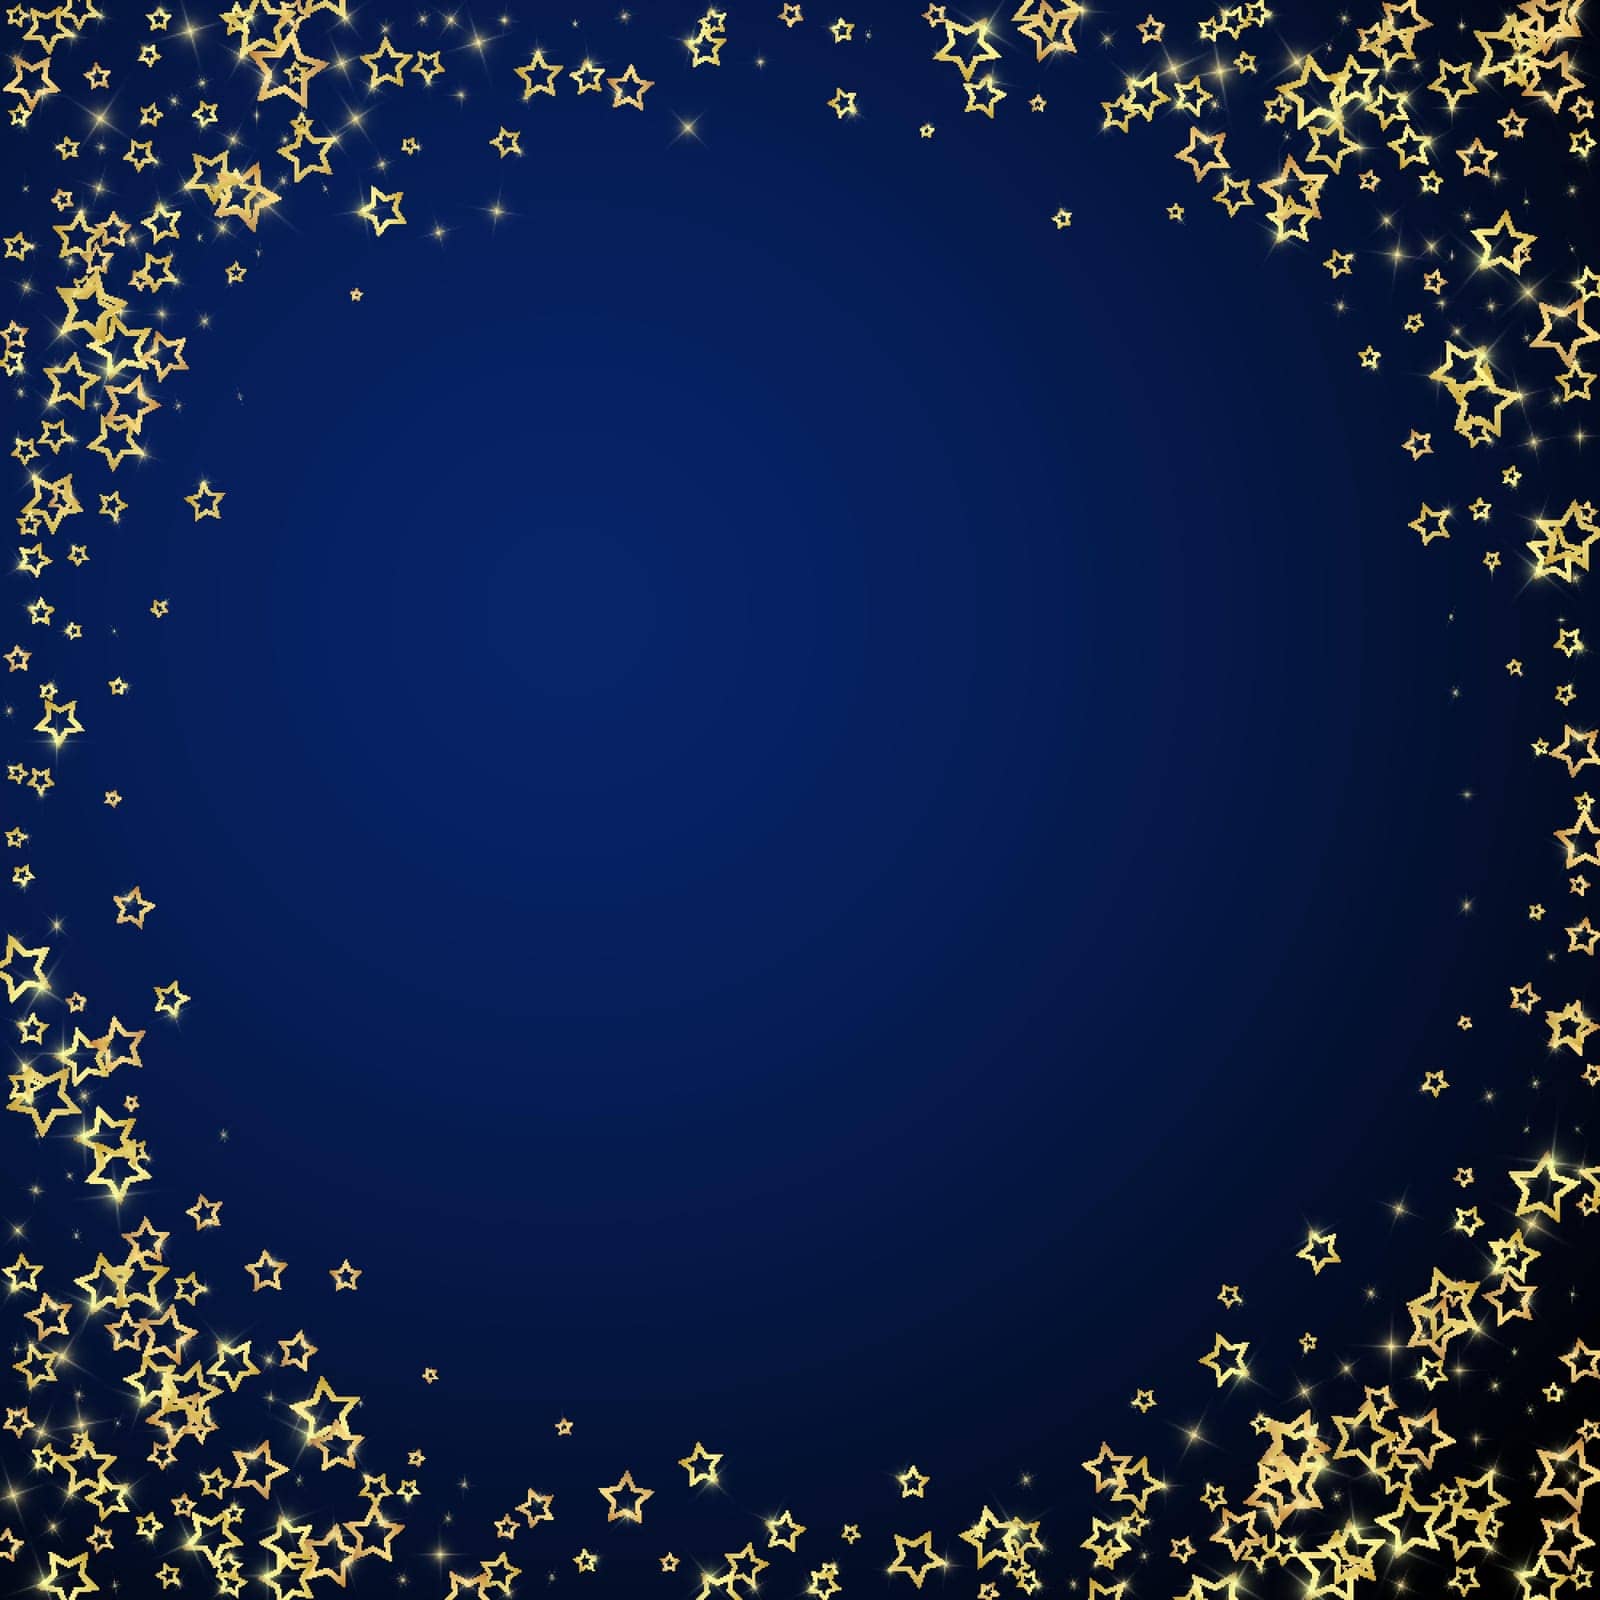 Starry night fairy tale background. by beginagain